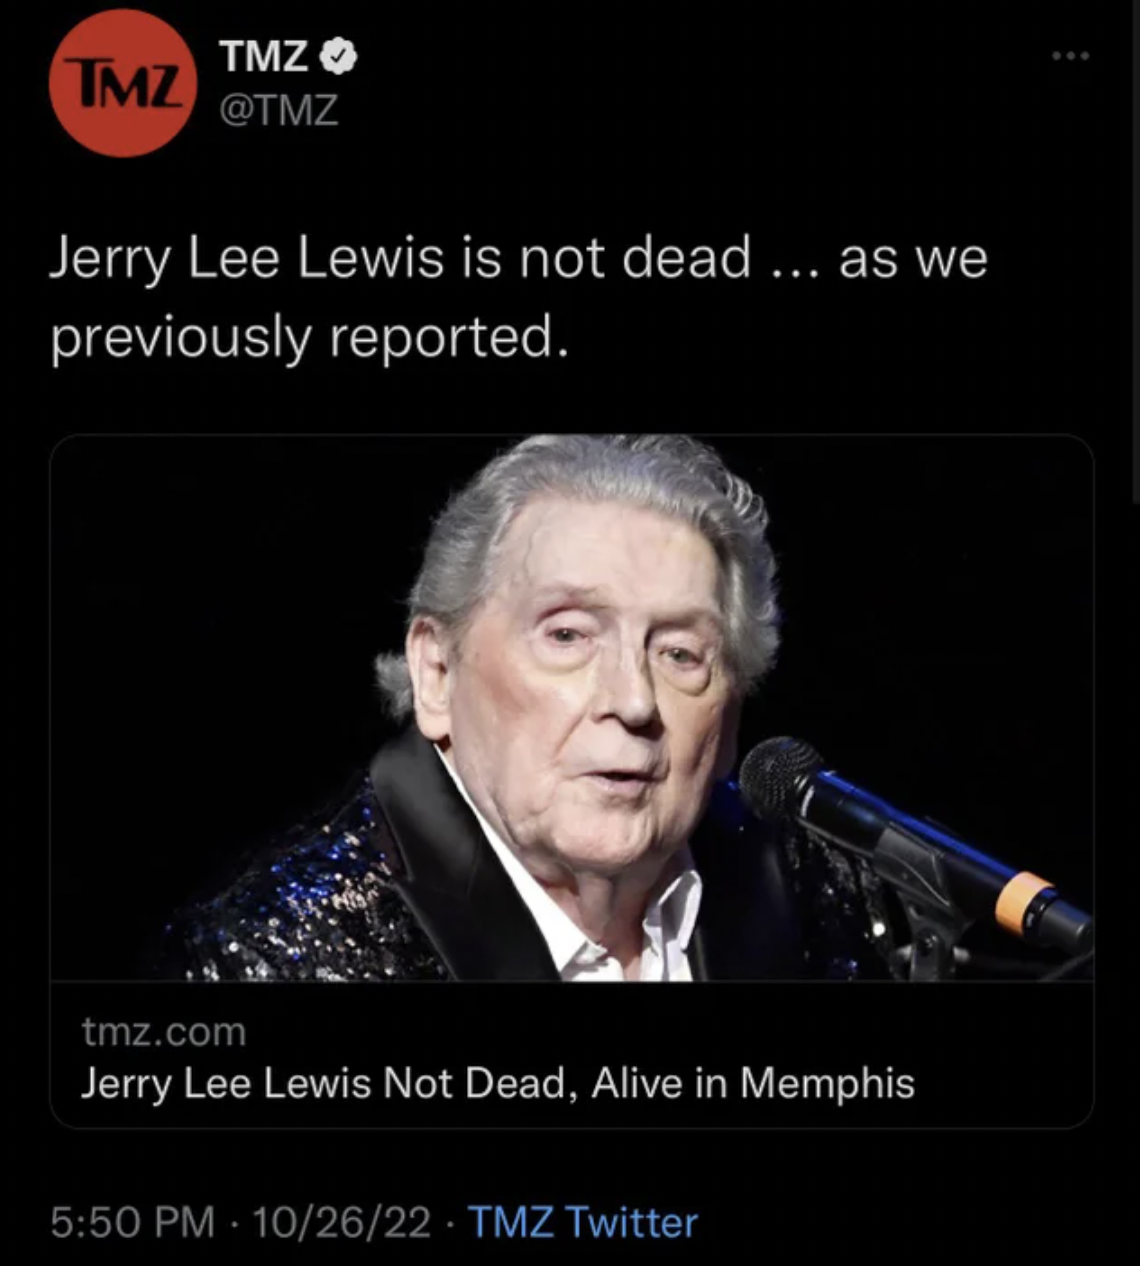 Funny facepalms - Tmz Tmz Jerry Lee Lewis is not dead ... as we previously reported. tmz.com Jerry Lee Lewis Not Dead, Alive in